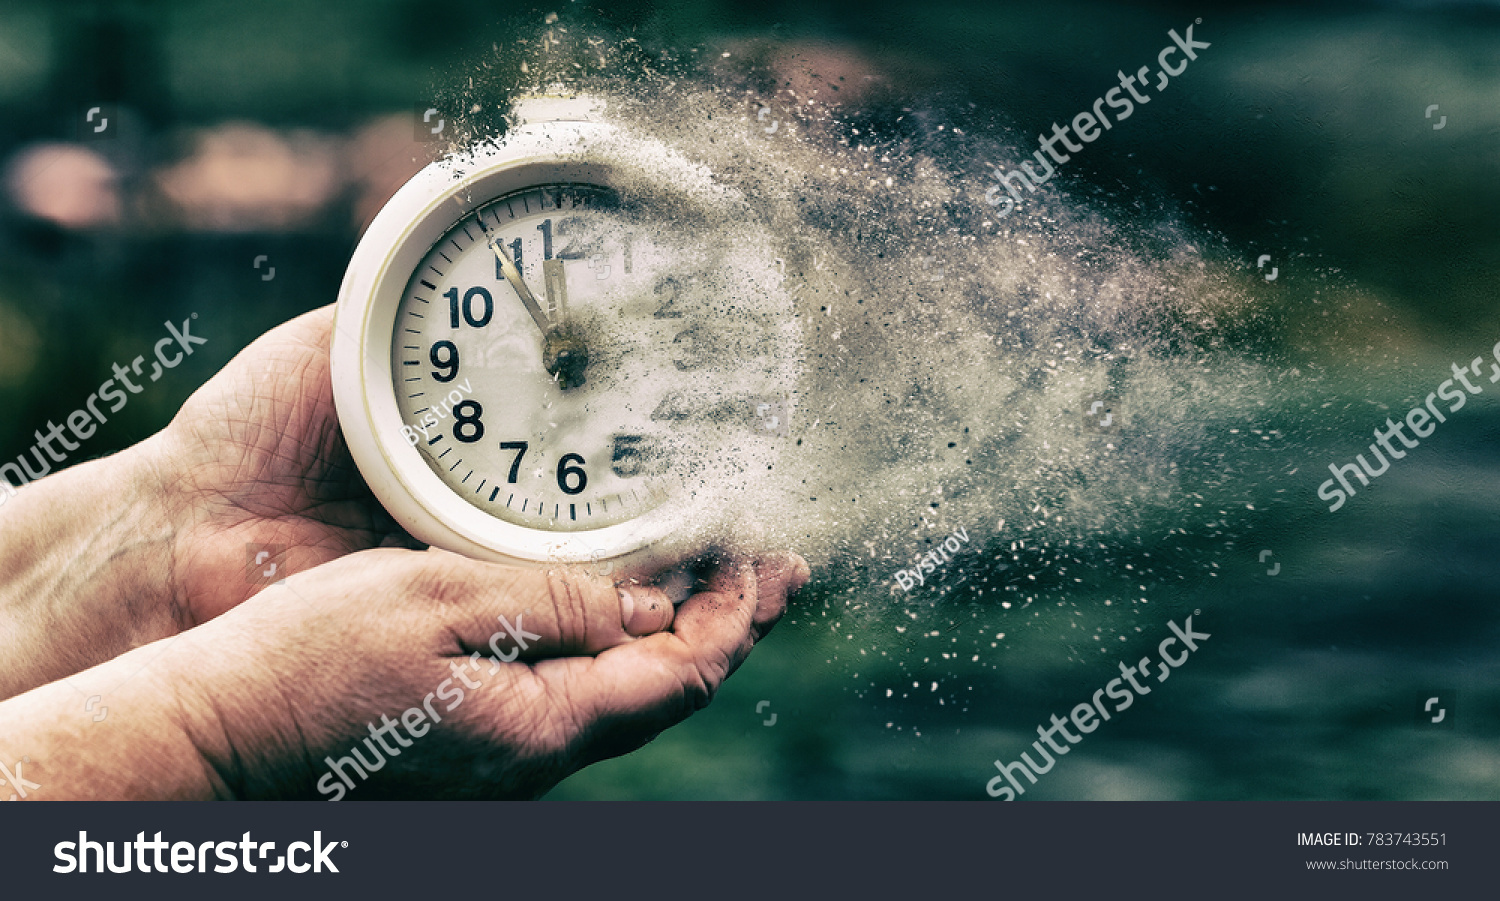 Retro alarm clock or vintage alarm clock in old hand. Time is running out concept shows clock that is dissolving away into little particles #783743551